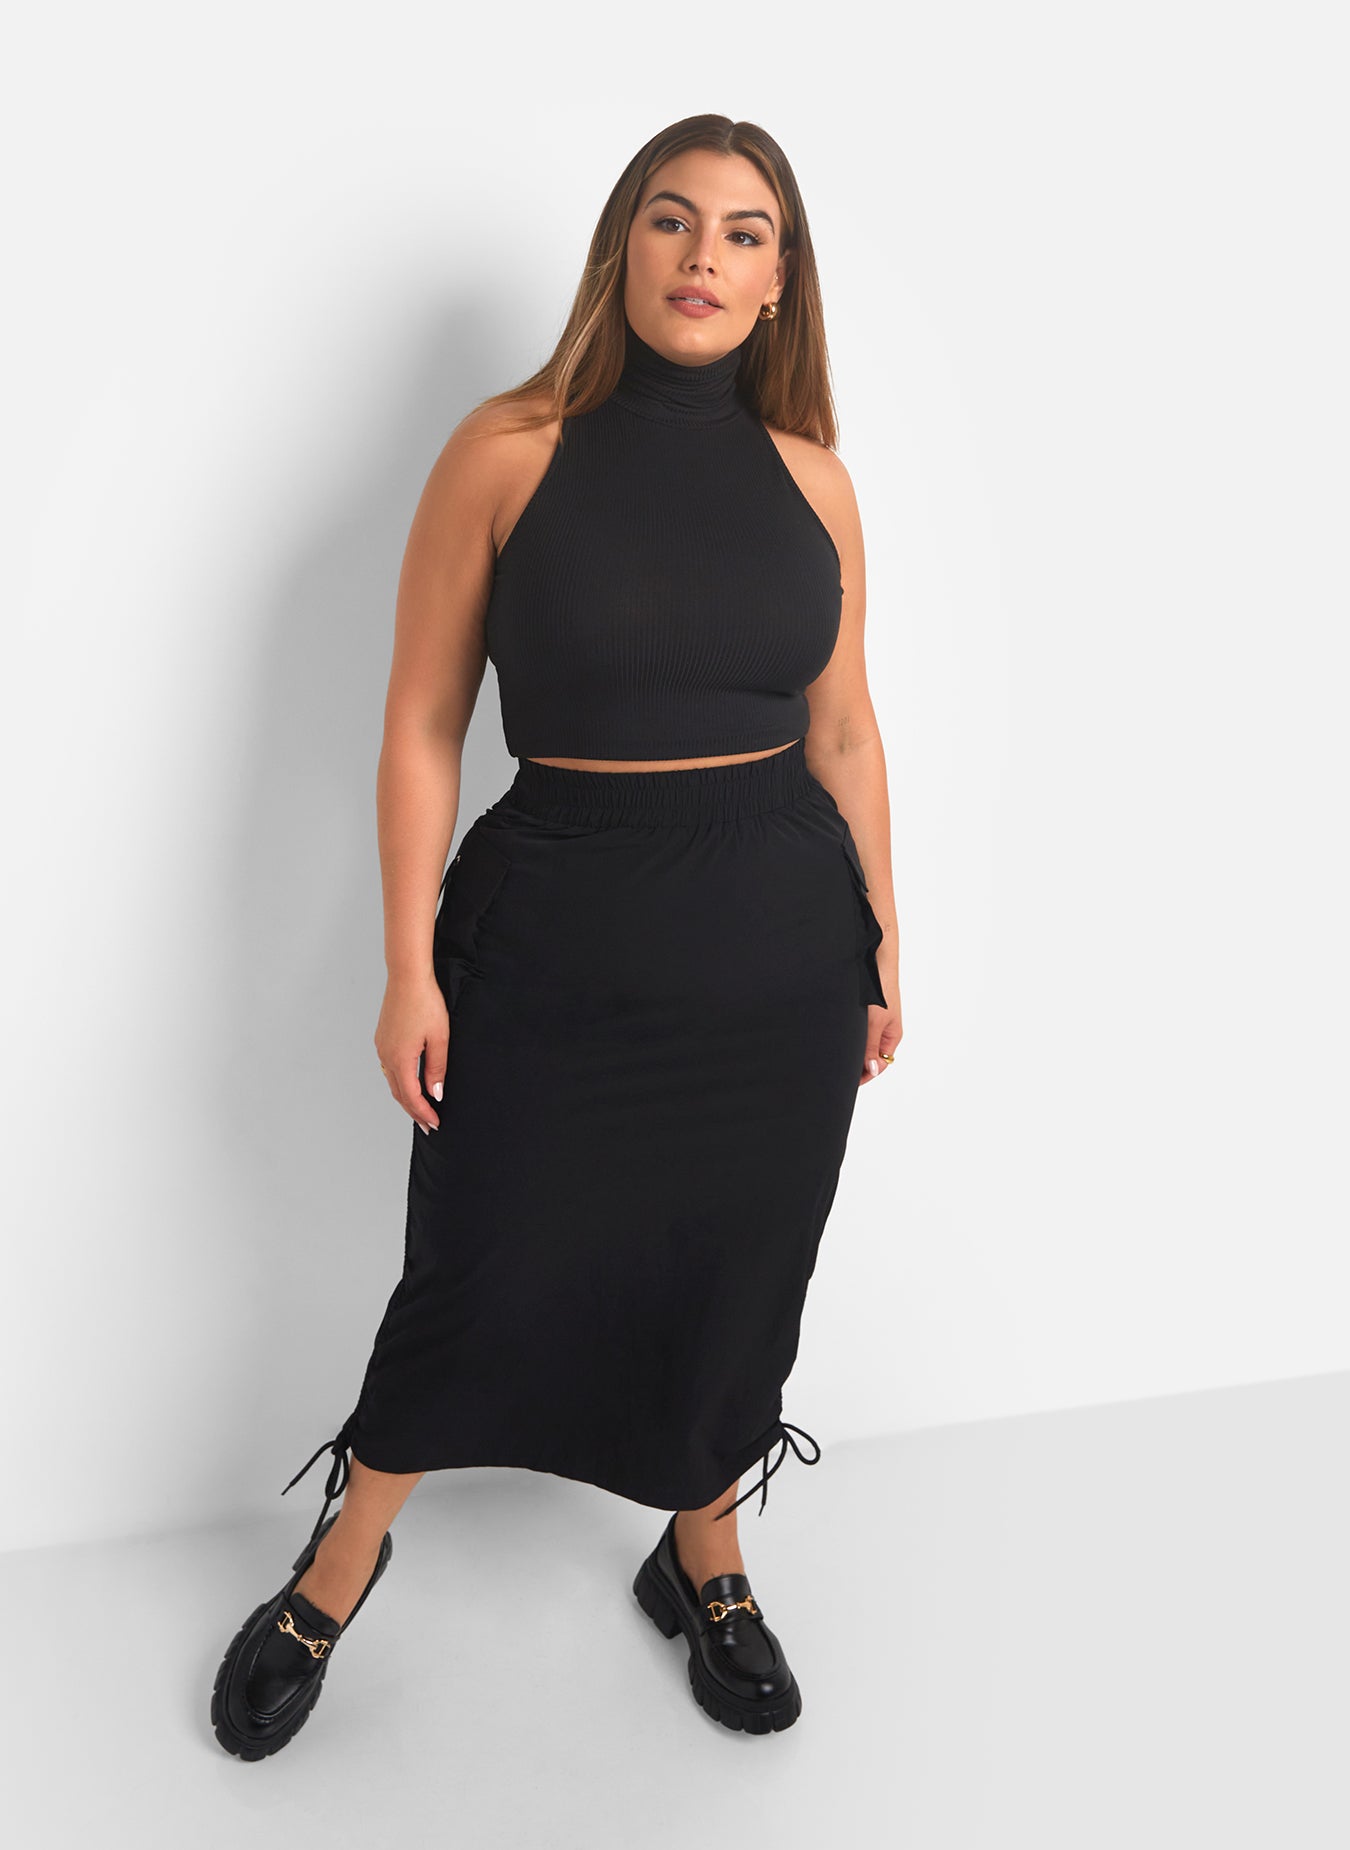 All Over Again Turtleneck Sleeveless Crop Top